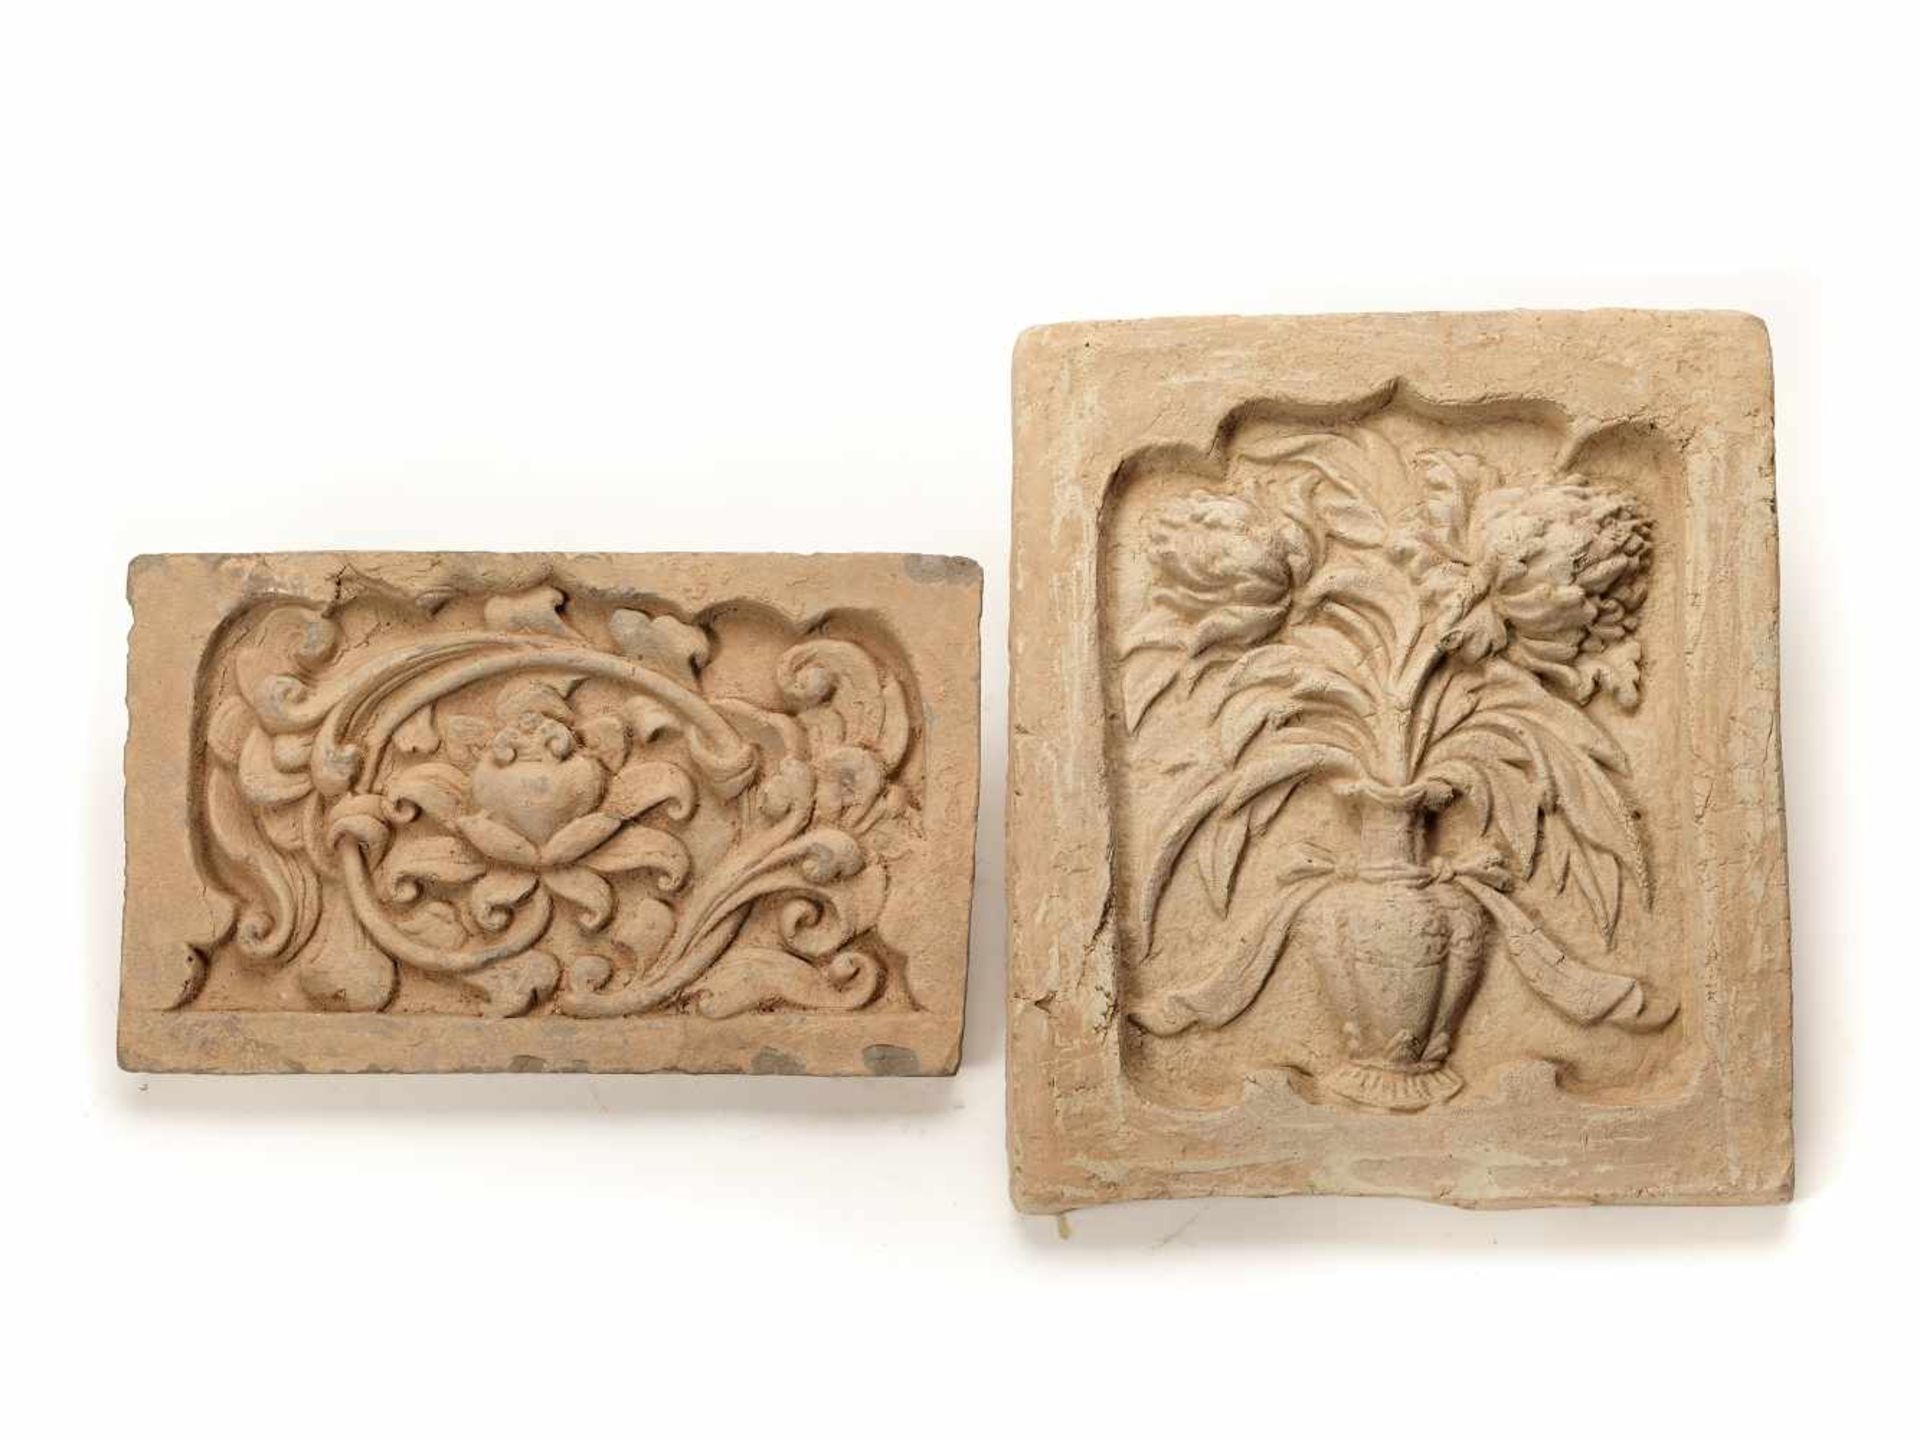 TWO TL-TESTED CHINESE CERAMIC WALL TILES, TANG DYNASTY CeramicChina, Tang dynasty (618–907)These two